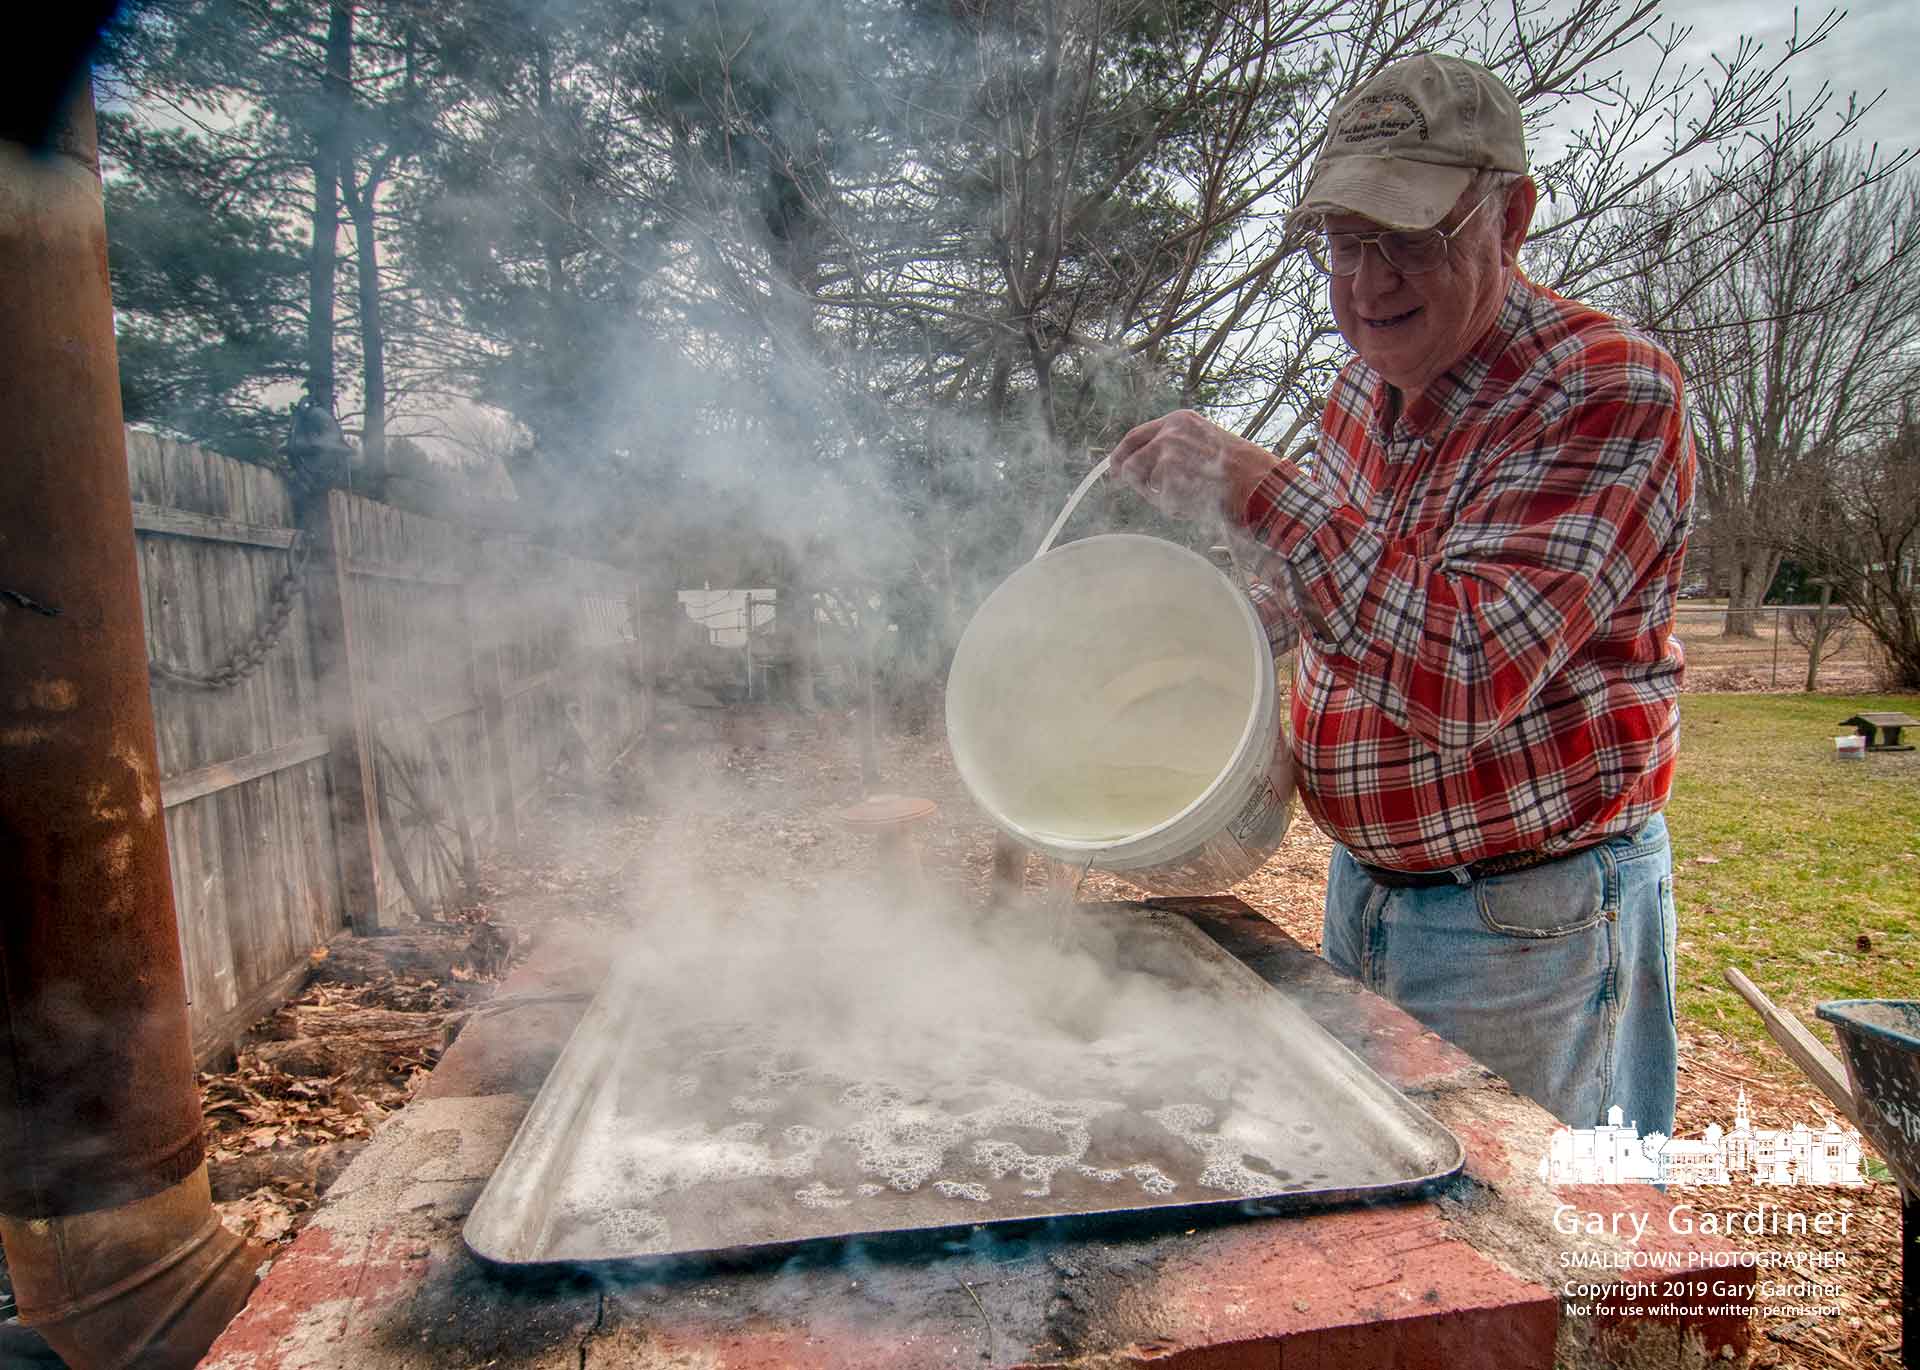 Bernie Woller pours fresh sugar maple sap into his wood-fired brick and concrete block evaporator where he will end up with more than six gallons of maple syrup from 250-plus gallons of sap collected from the trees in his yard. My Final Photo for March 13, 2019.